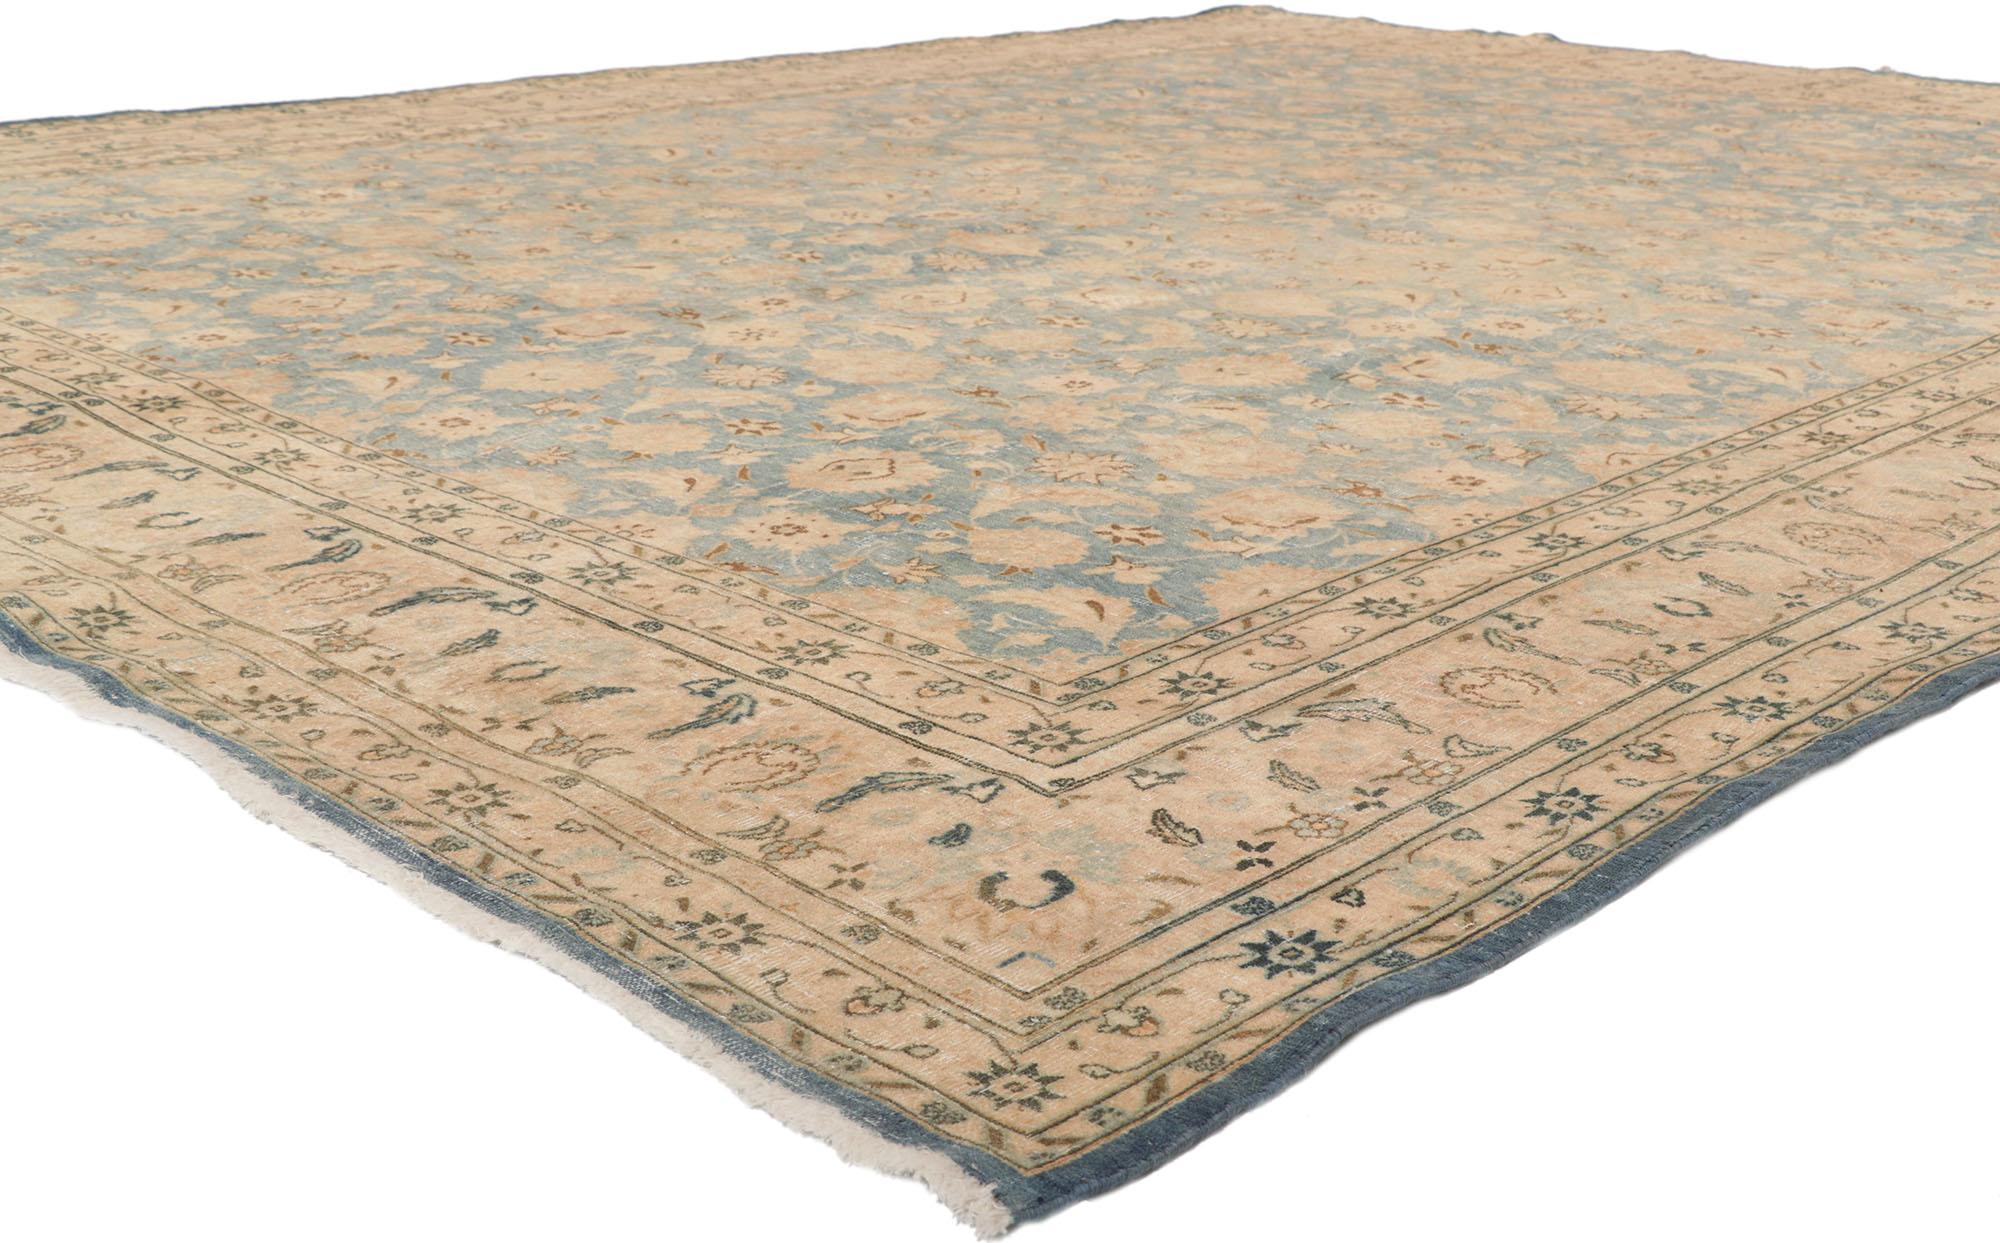 60973 Distressed Vintage Persian Rug, 09'09 x 12'07


Abrash. Distressed. Desirable Age Wear. Antique Wash.
Hand-knotted wool.
Made in Iran.
Measures: 09'09 x 12'07.